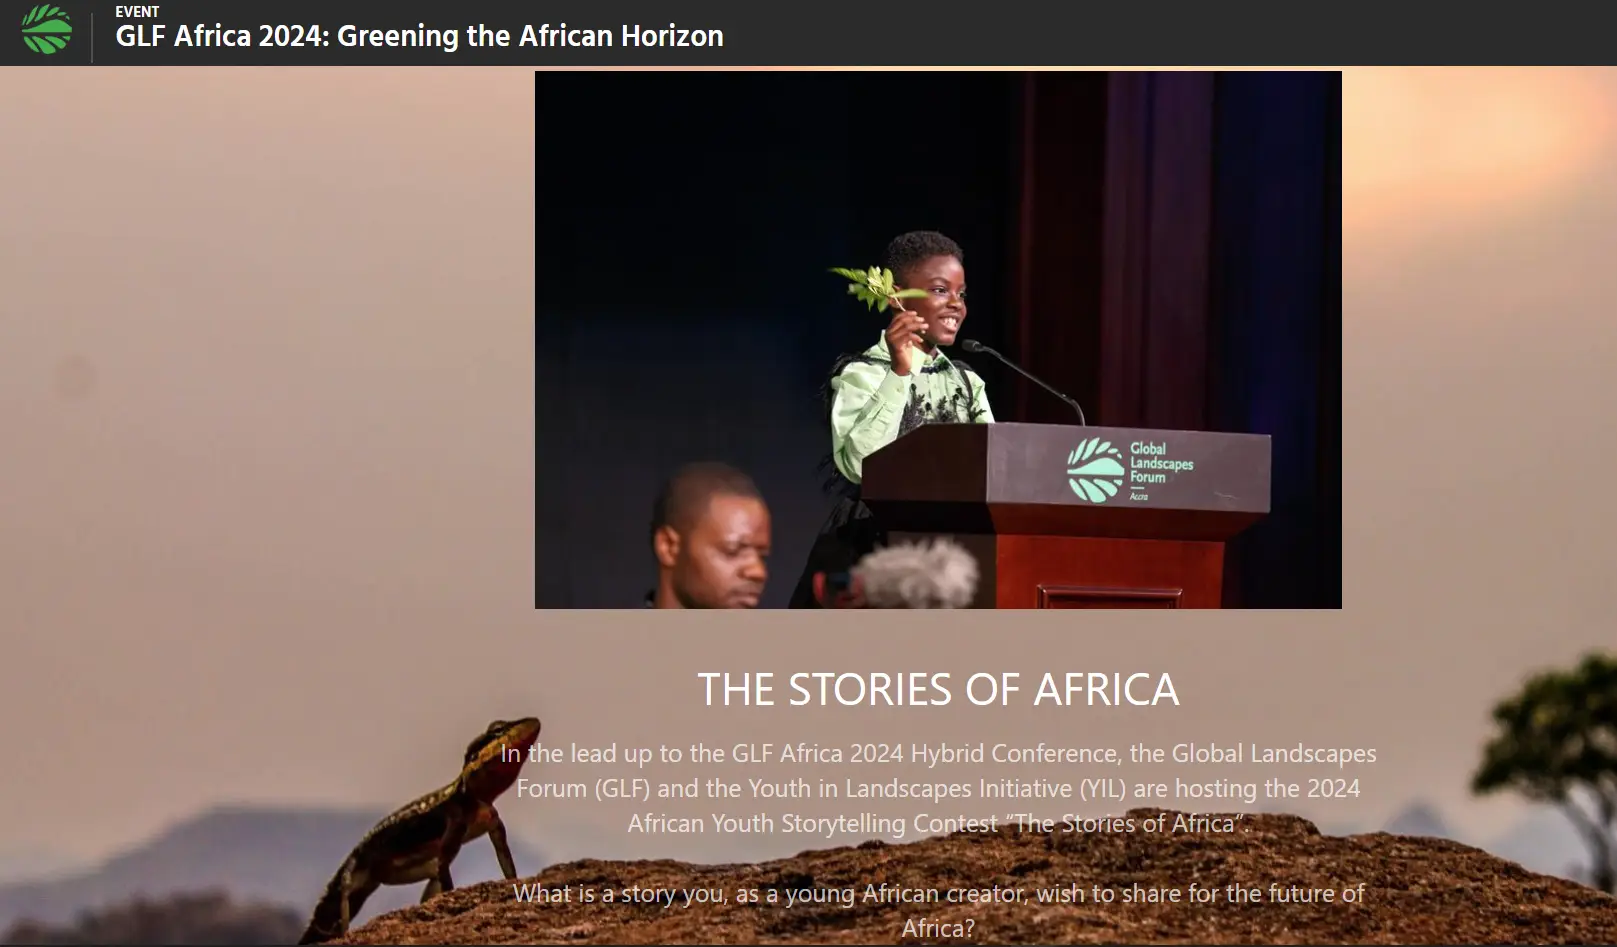 African Youth Storytelling Contest 2024: A Platform for Change